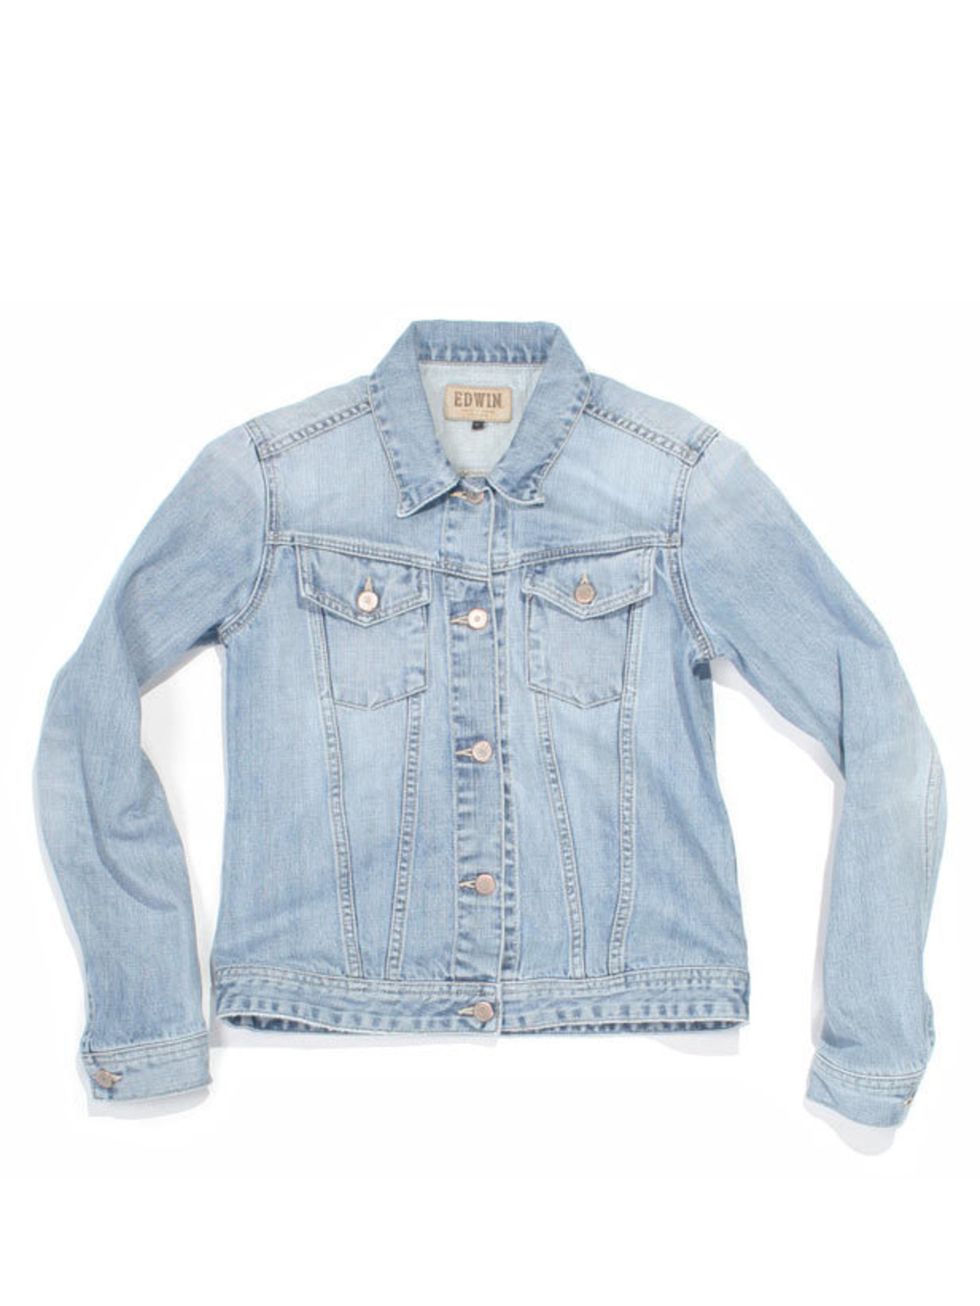 <p>Edwin denim jacket, £175, at The Three Threads, for stockists call 0207 749 0503</p>